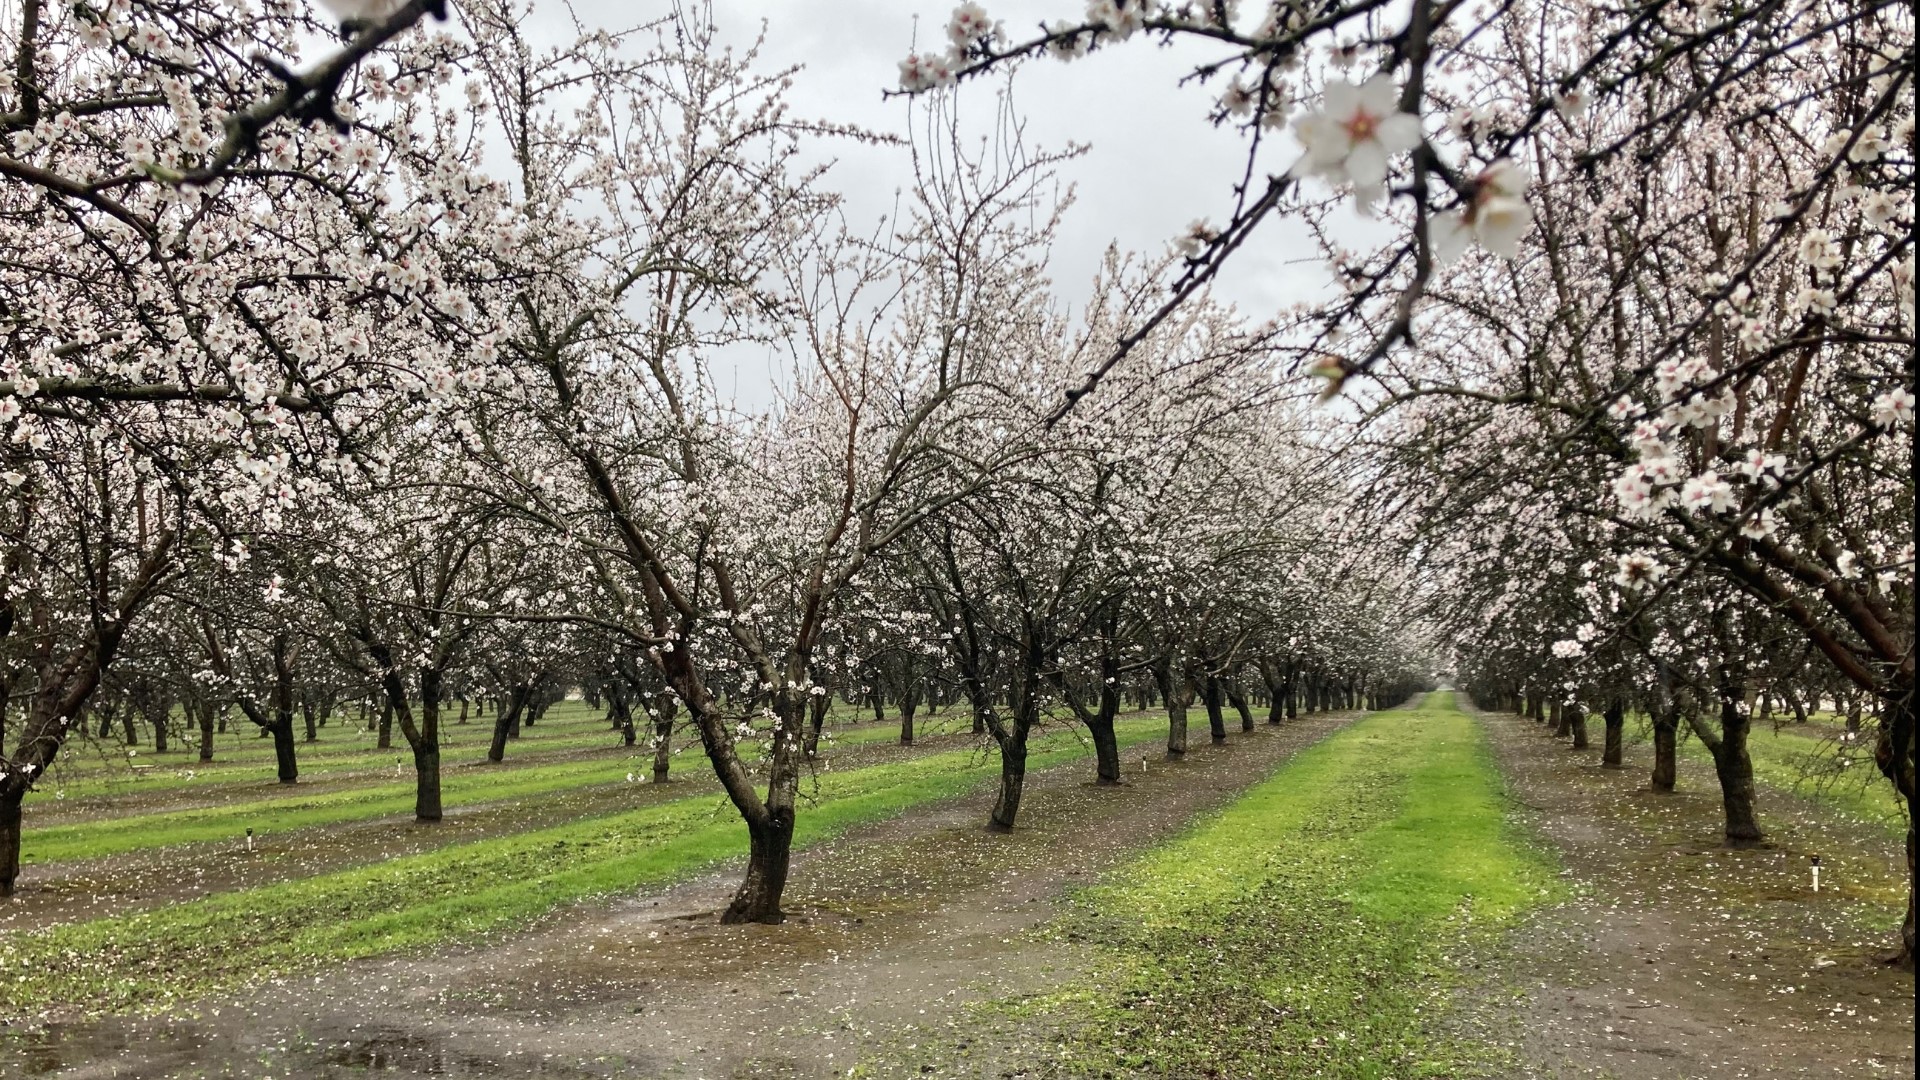 Bees aren't pollinating as long as it stays rainy in the orchards